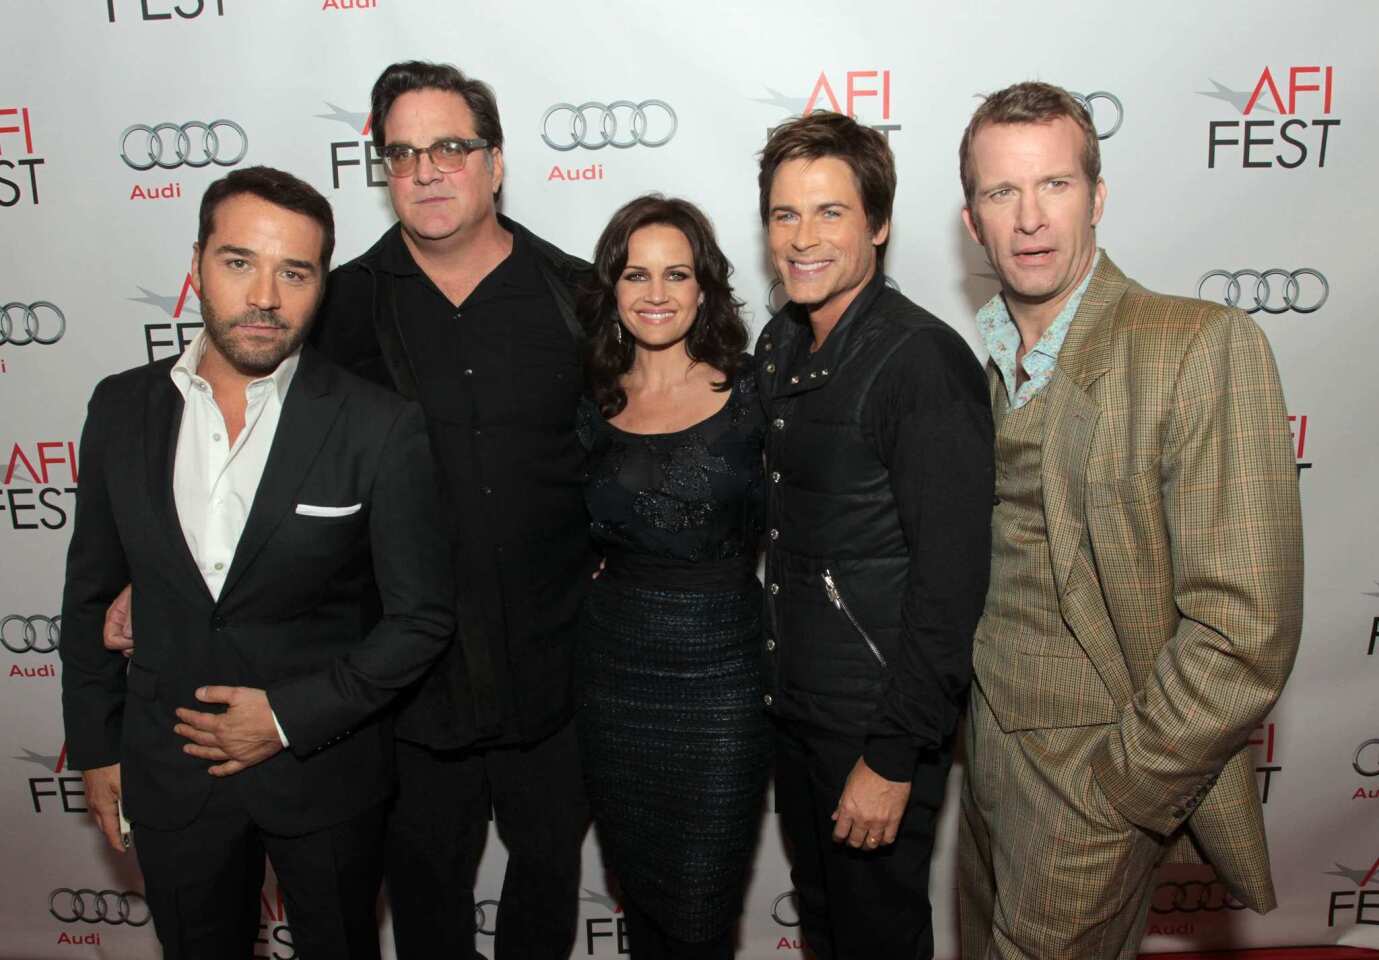 Jeremy Piven, Mark Pellington, Carla Gugino, Rob Lowe and Thomas Jane gather at the Egyptian Theatre for a group photo during a special screening of their film "I Melt With You" at AFI Fest 2011. For more photos from the scene at the festival, click here.